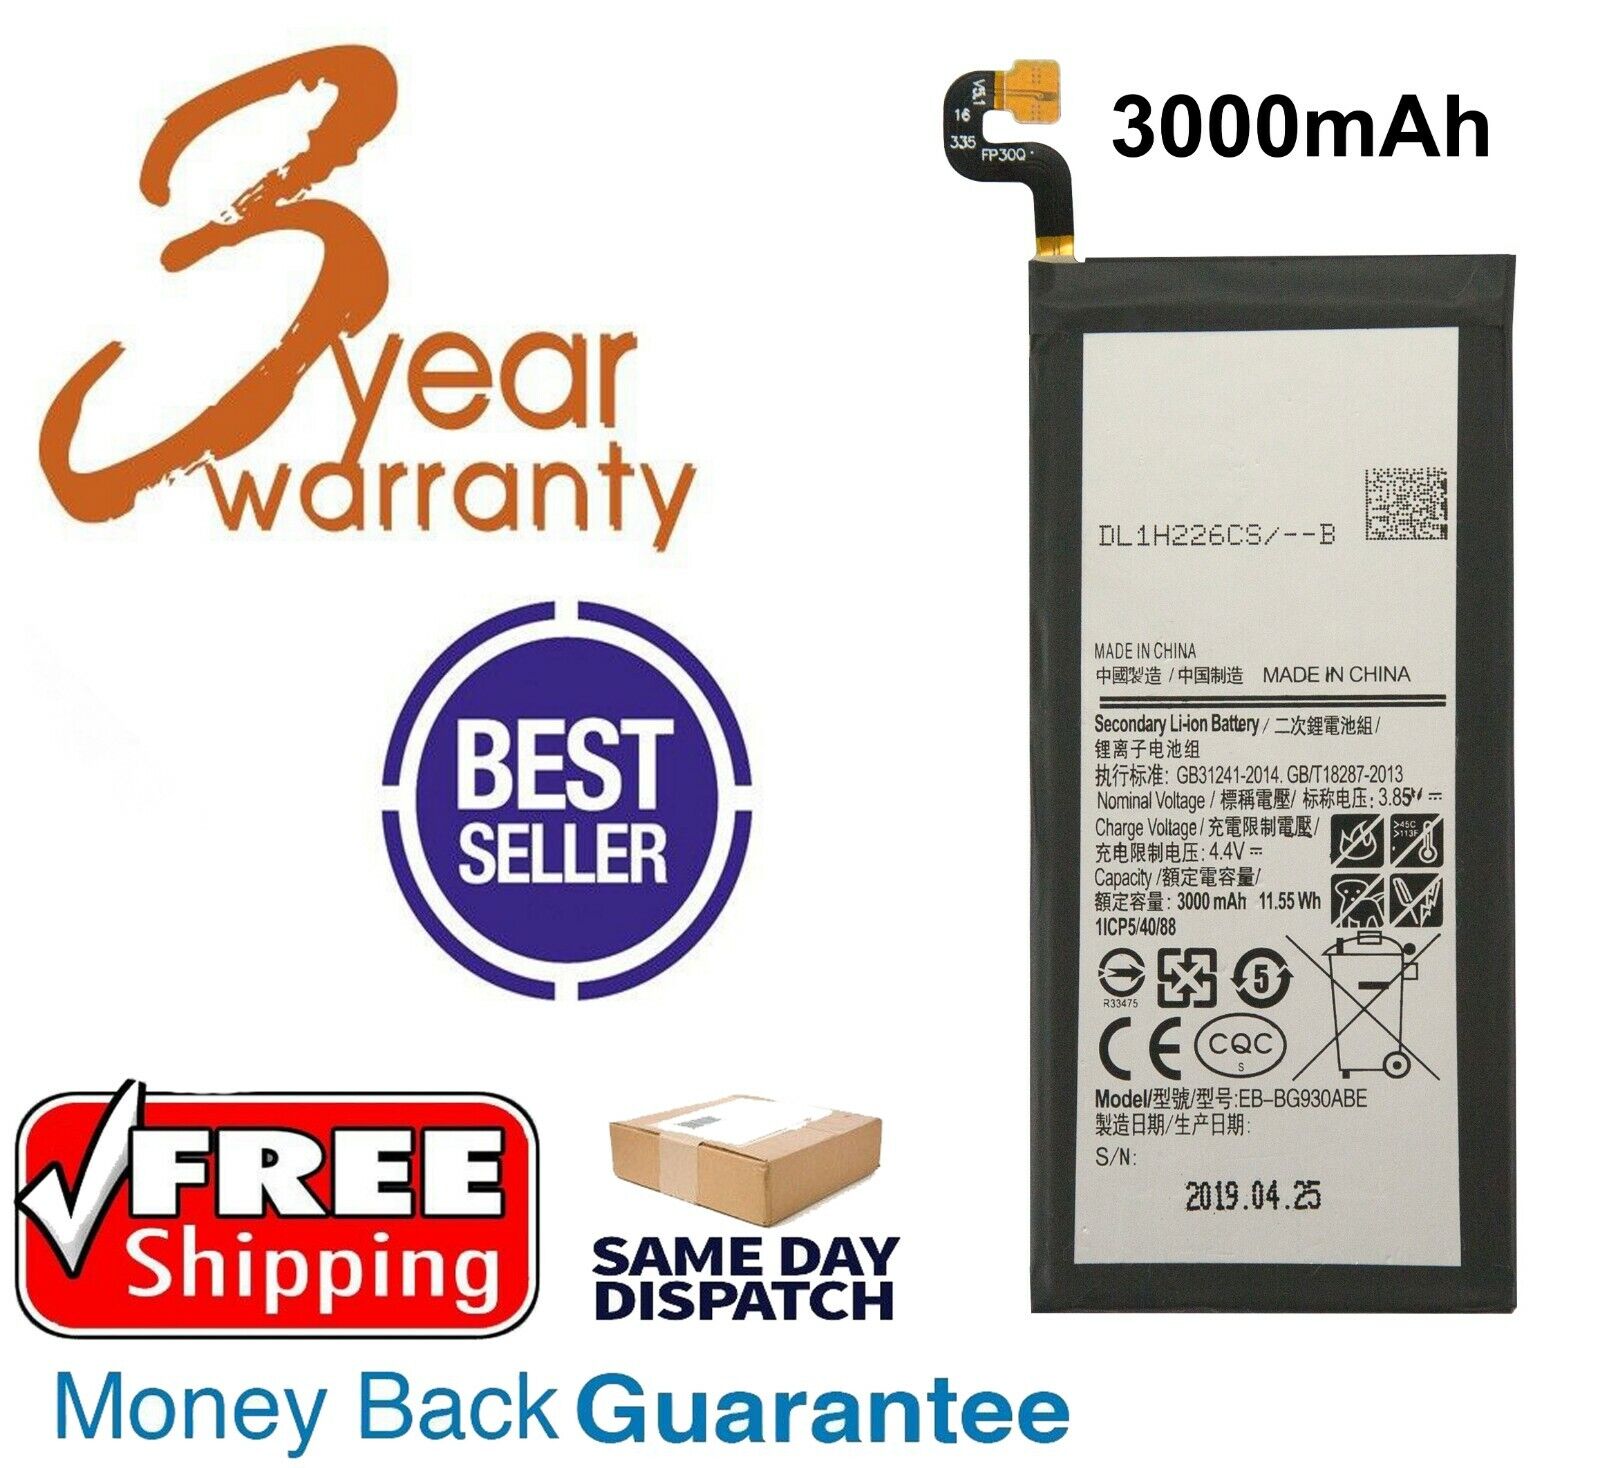 Replacement Battery Max 78% OFF Fits Samsung Galaxy 1 year warranty EB-BG930ABE 3000 G930 S7